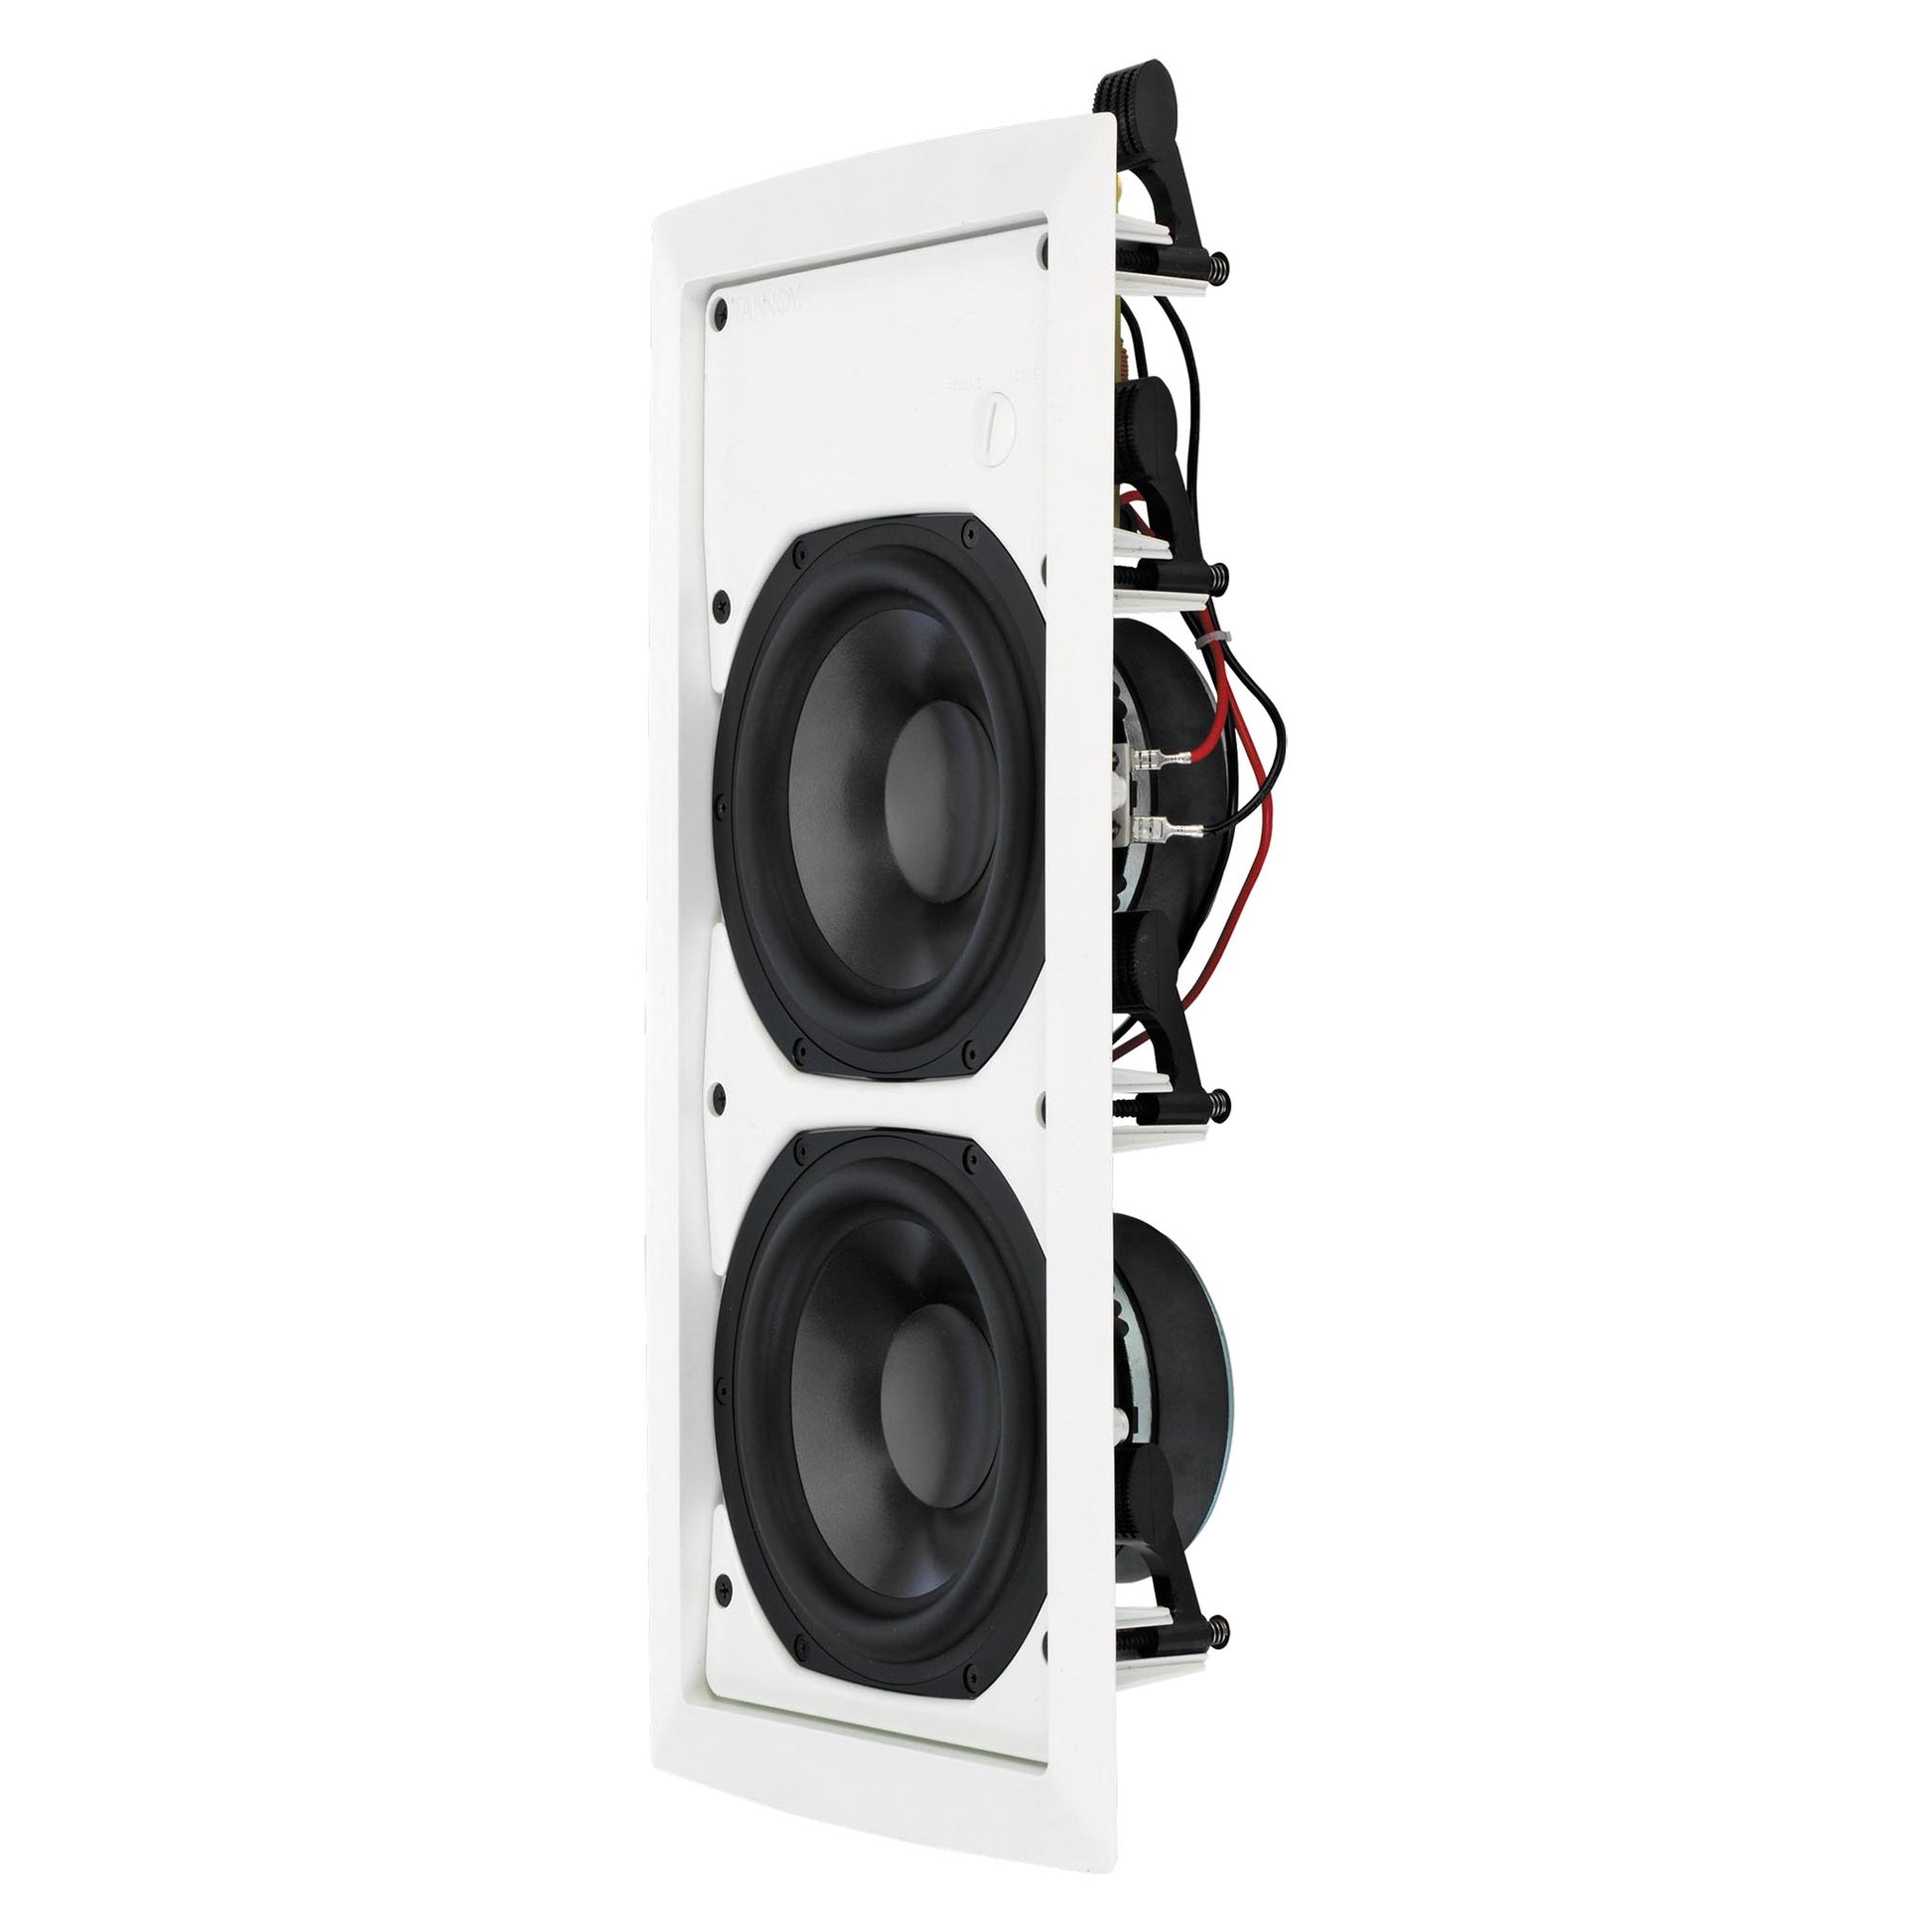 Tannoy iW 62TS In-Wall Subwoofer - Side view